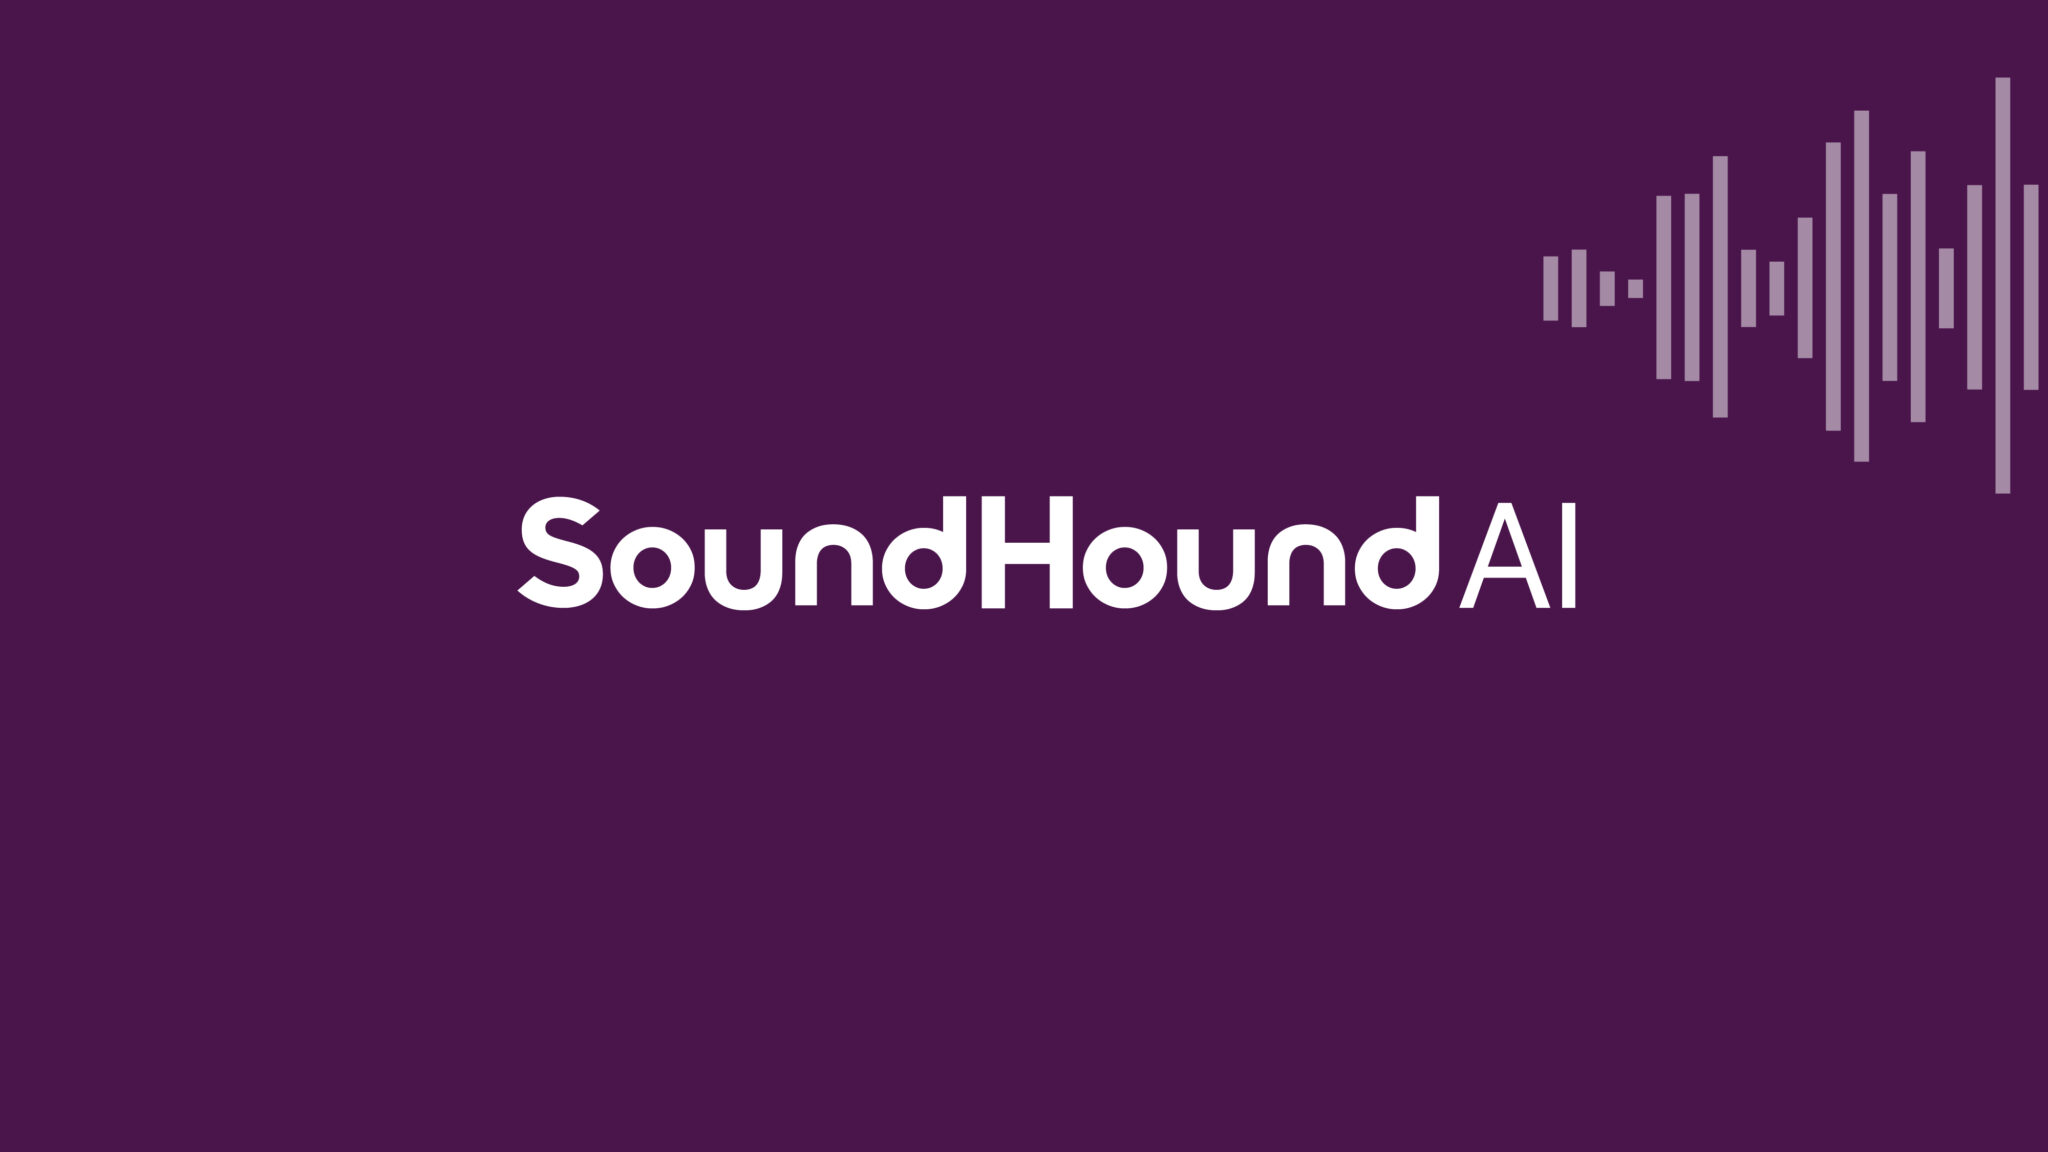 SoundHound AI takes over Allset and focuses entirely on voice orders